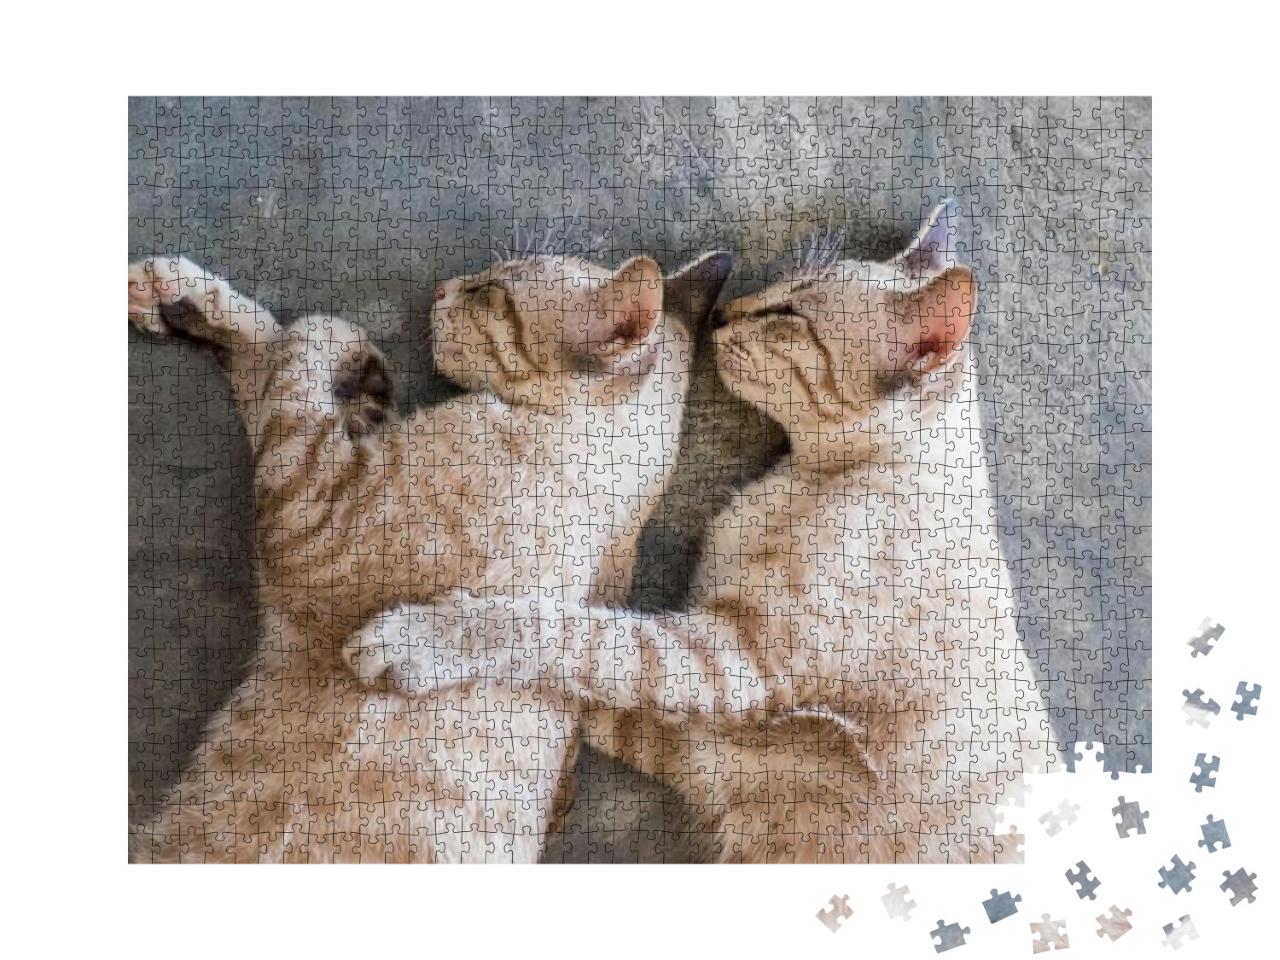 Two Cat Kitten Brethren Sleeping Hug Embrace... Jigsaw Puzzle with 1000 pieces